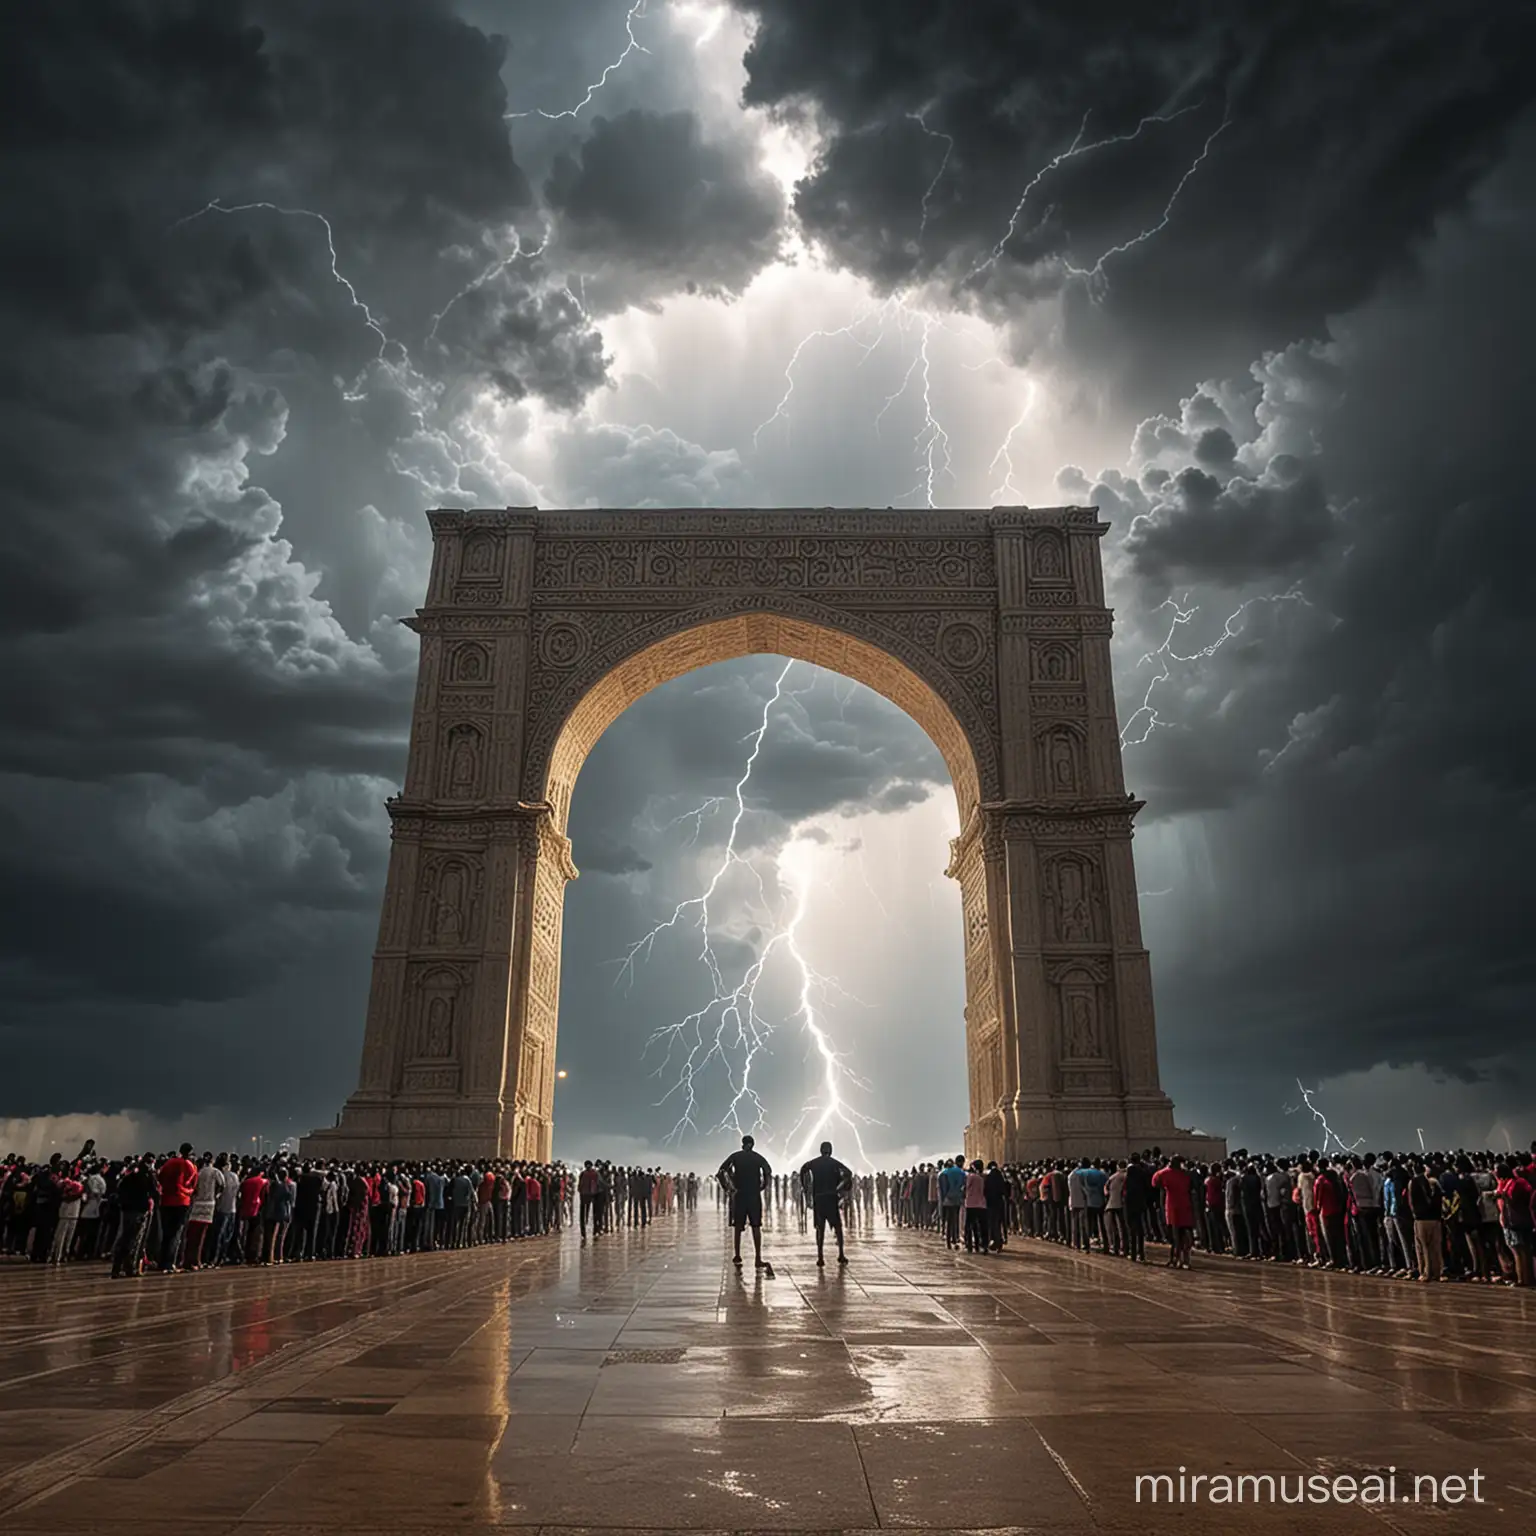 arch door in heaven filled with thunder full of light and heavy clouds with a queue of million men entering in